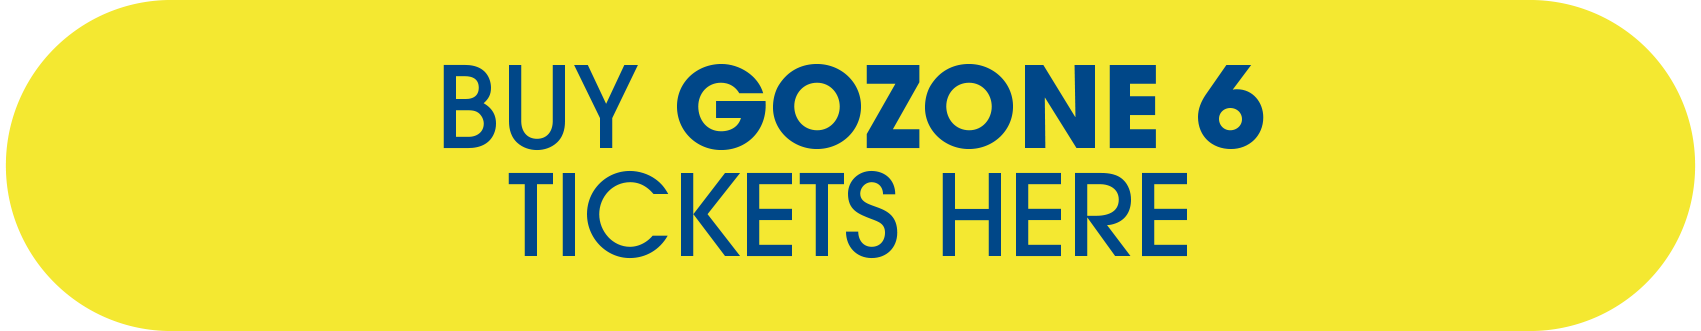 gozone 6 link to tickets